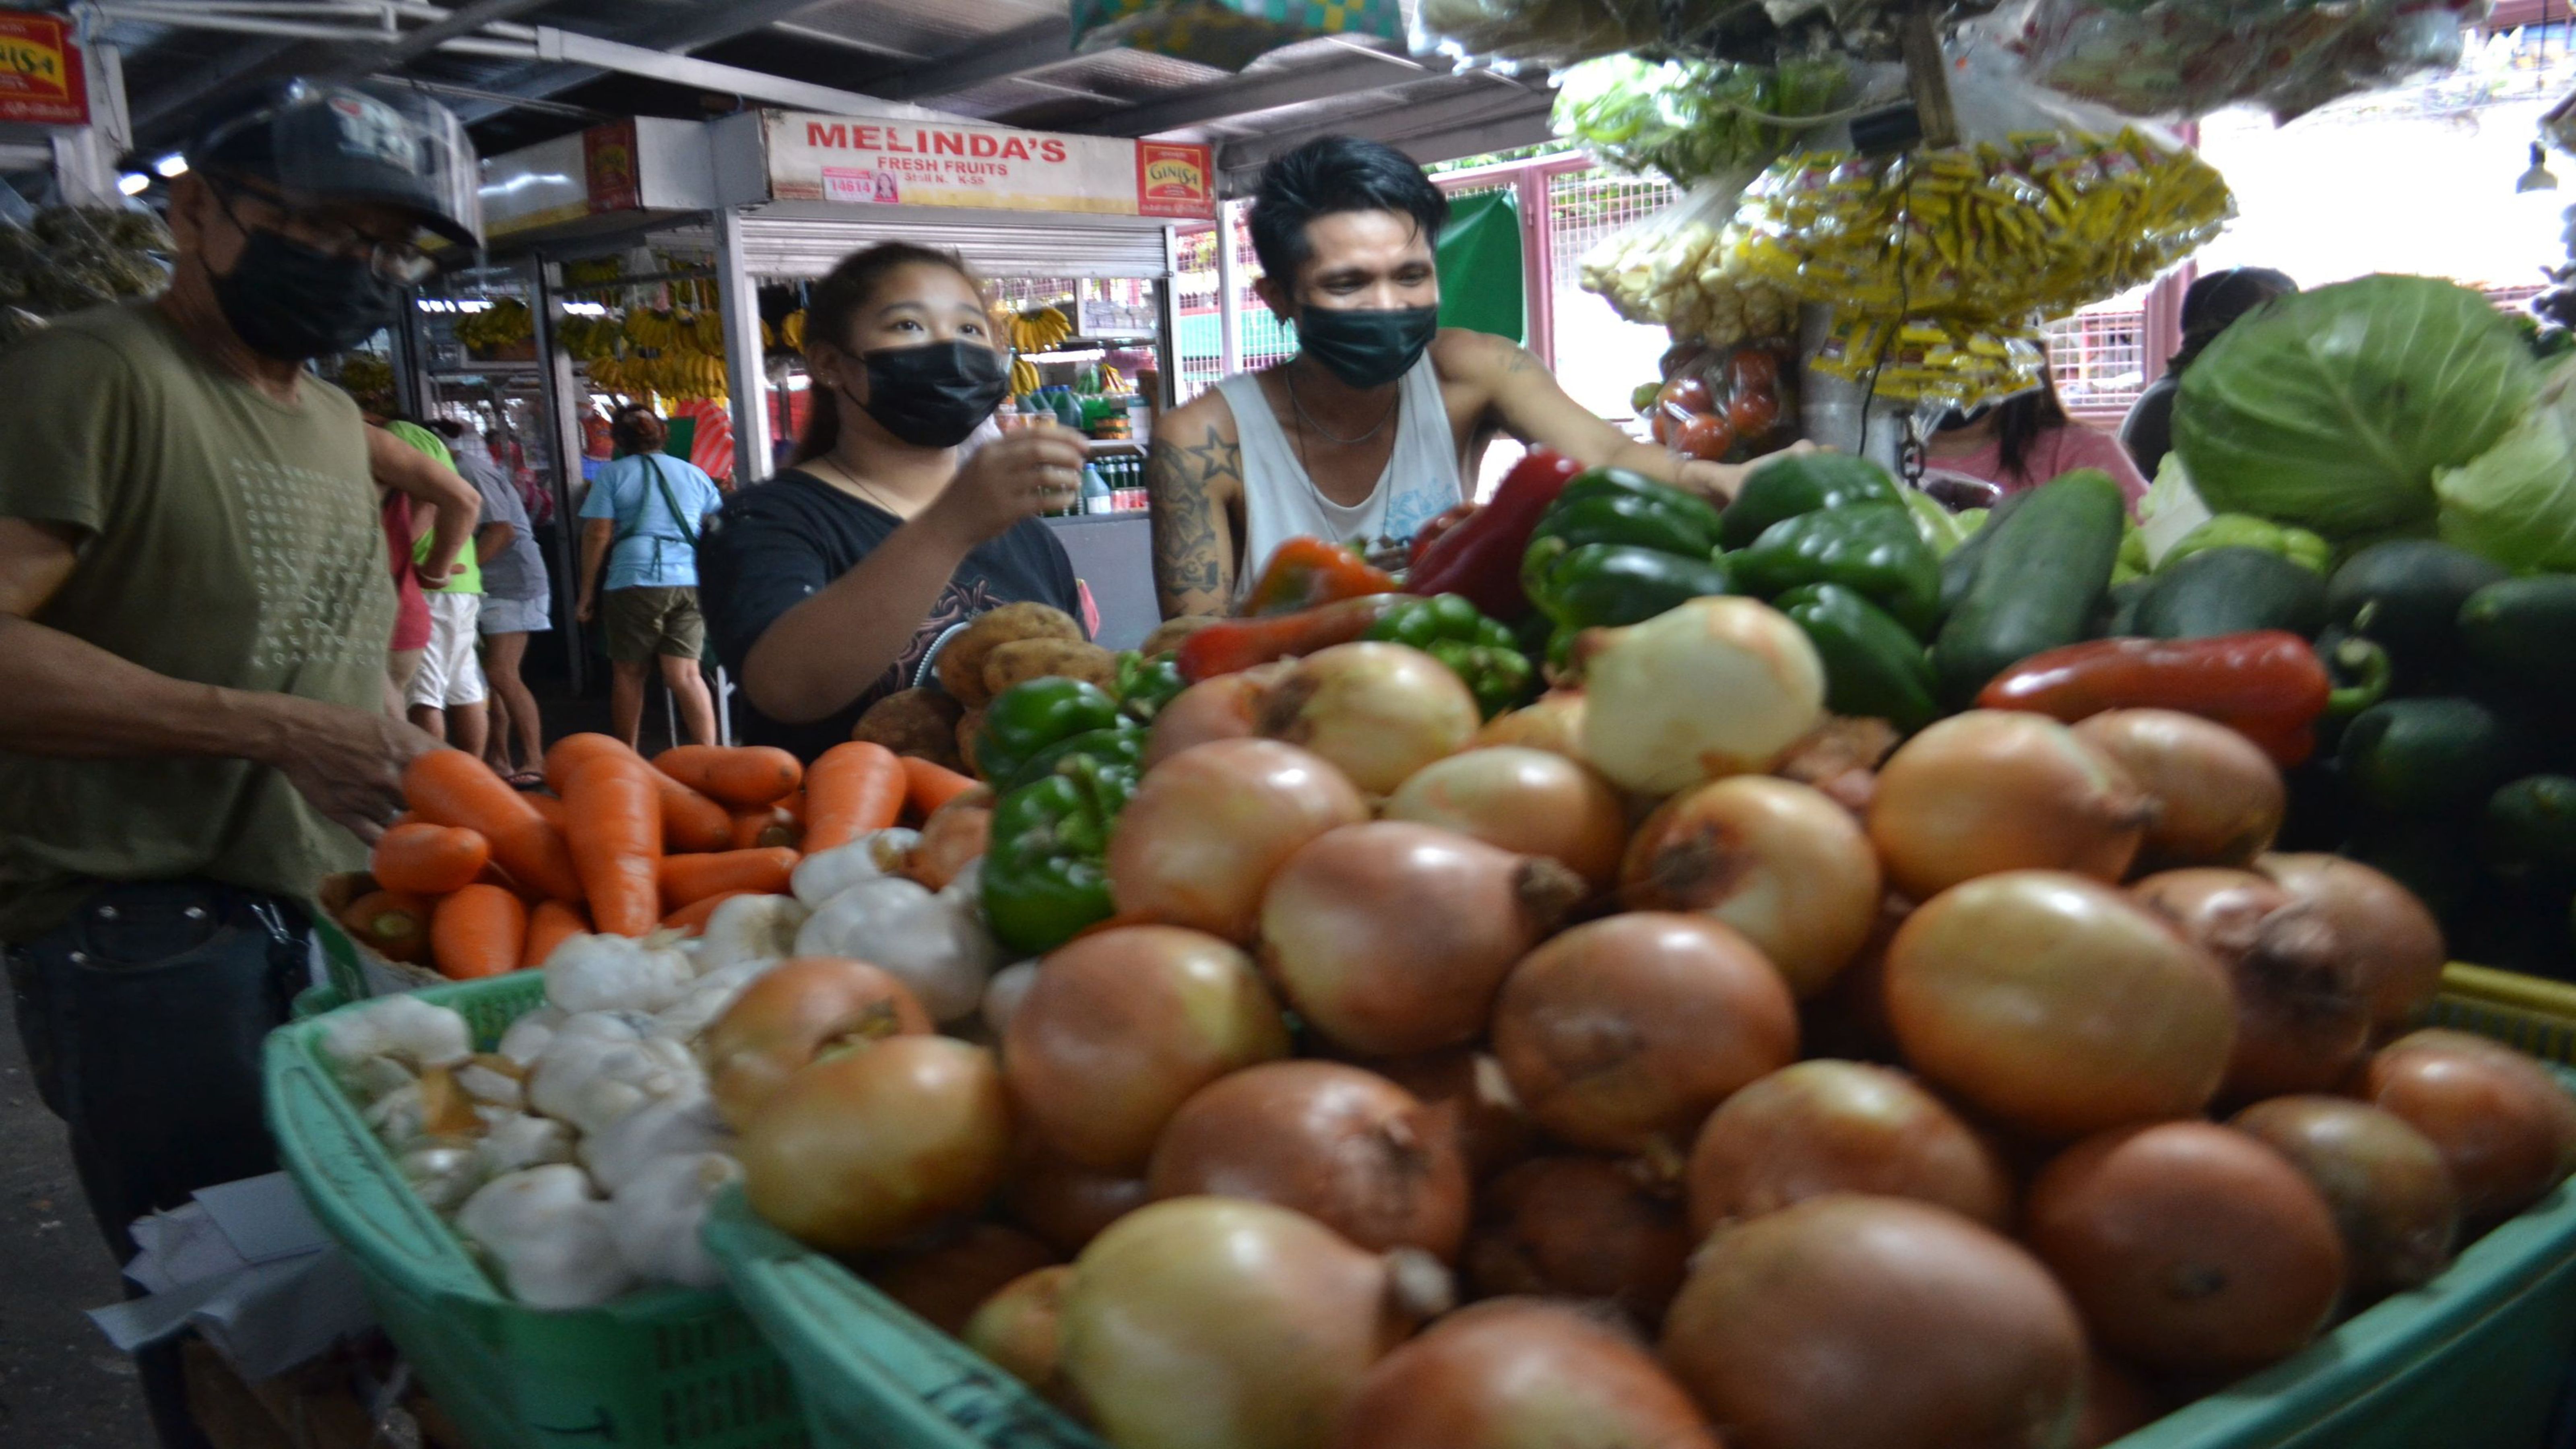 INFLATION HITS 32-MONTH HIGH photo by Mike Taboy